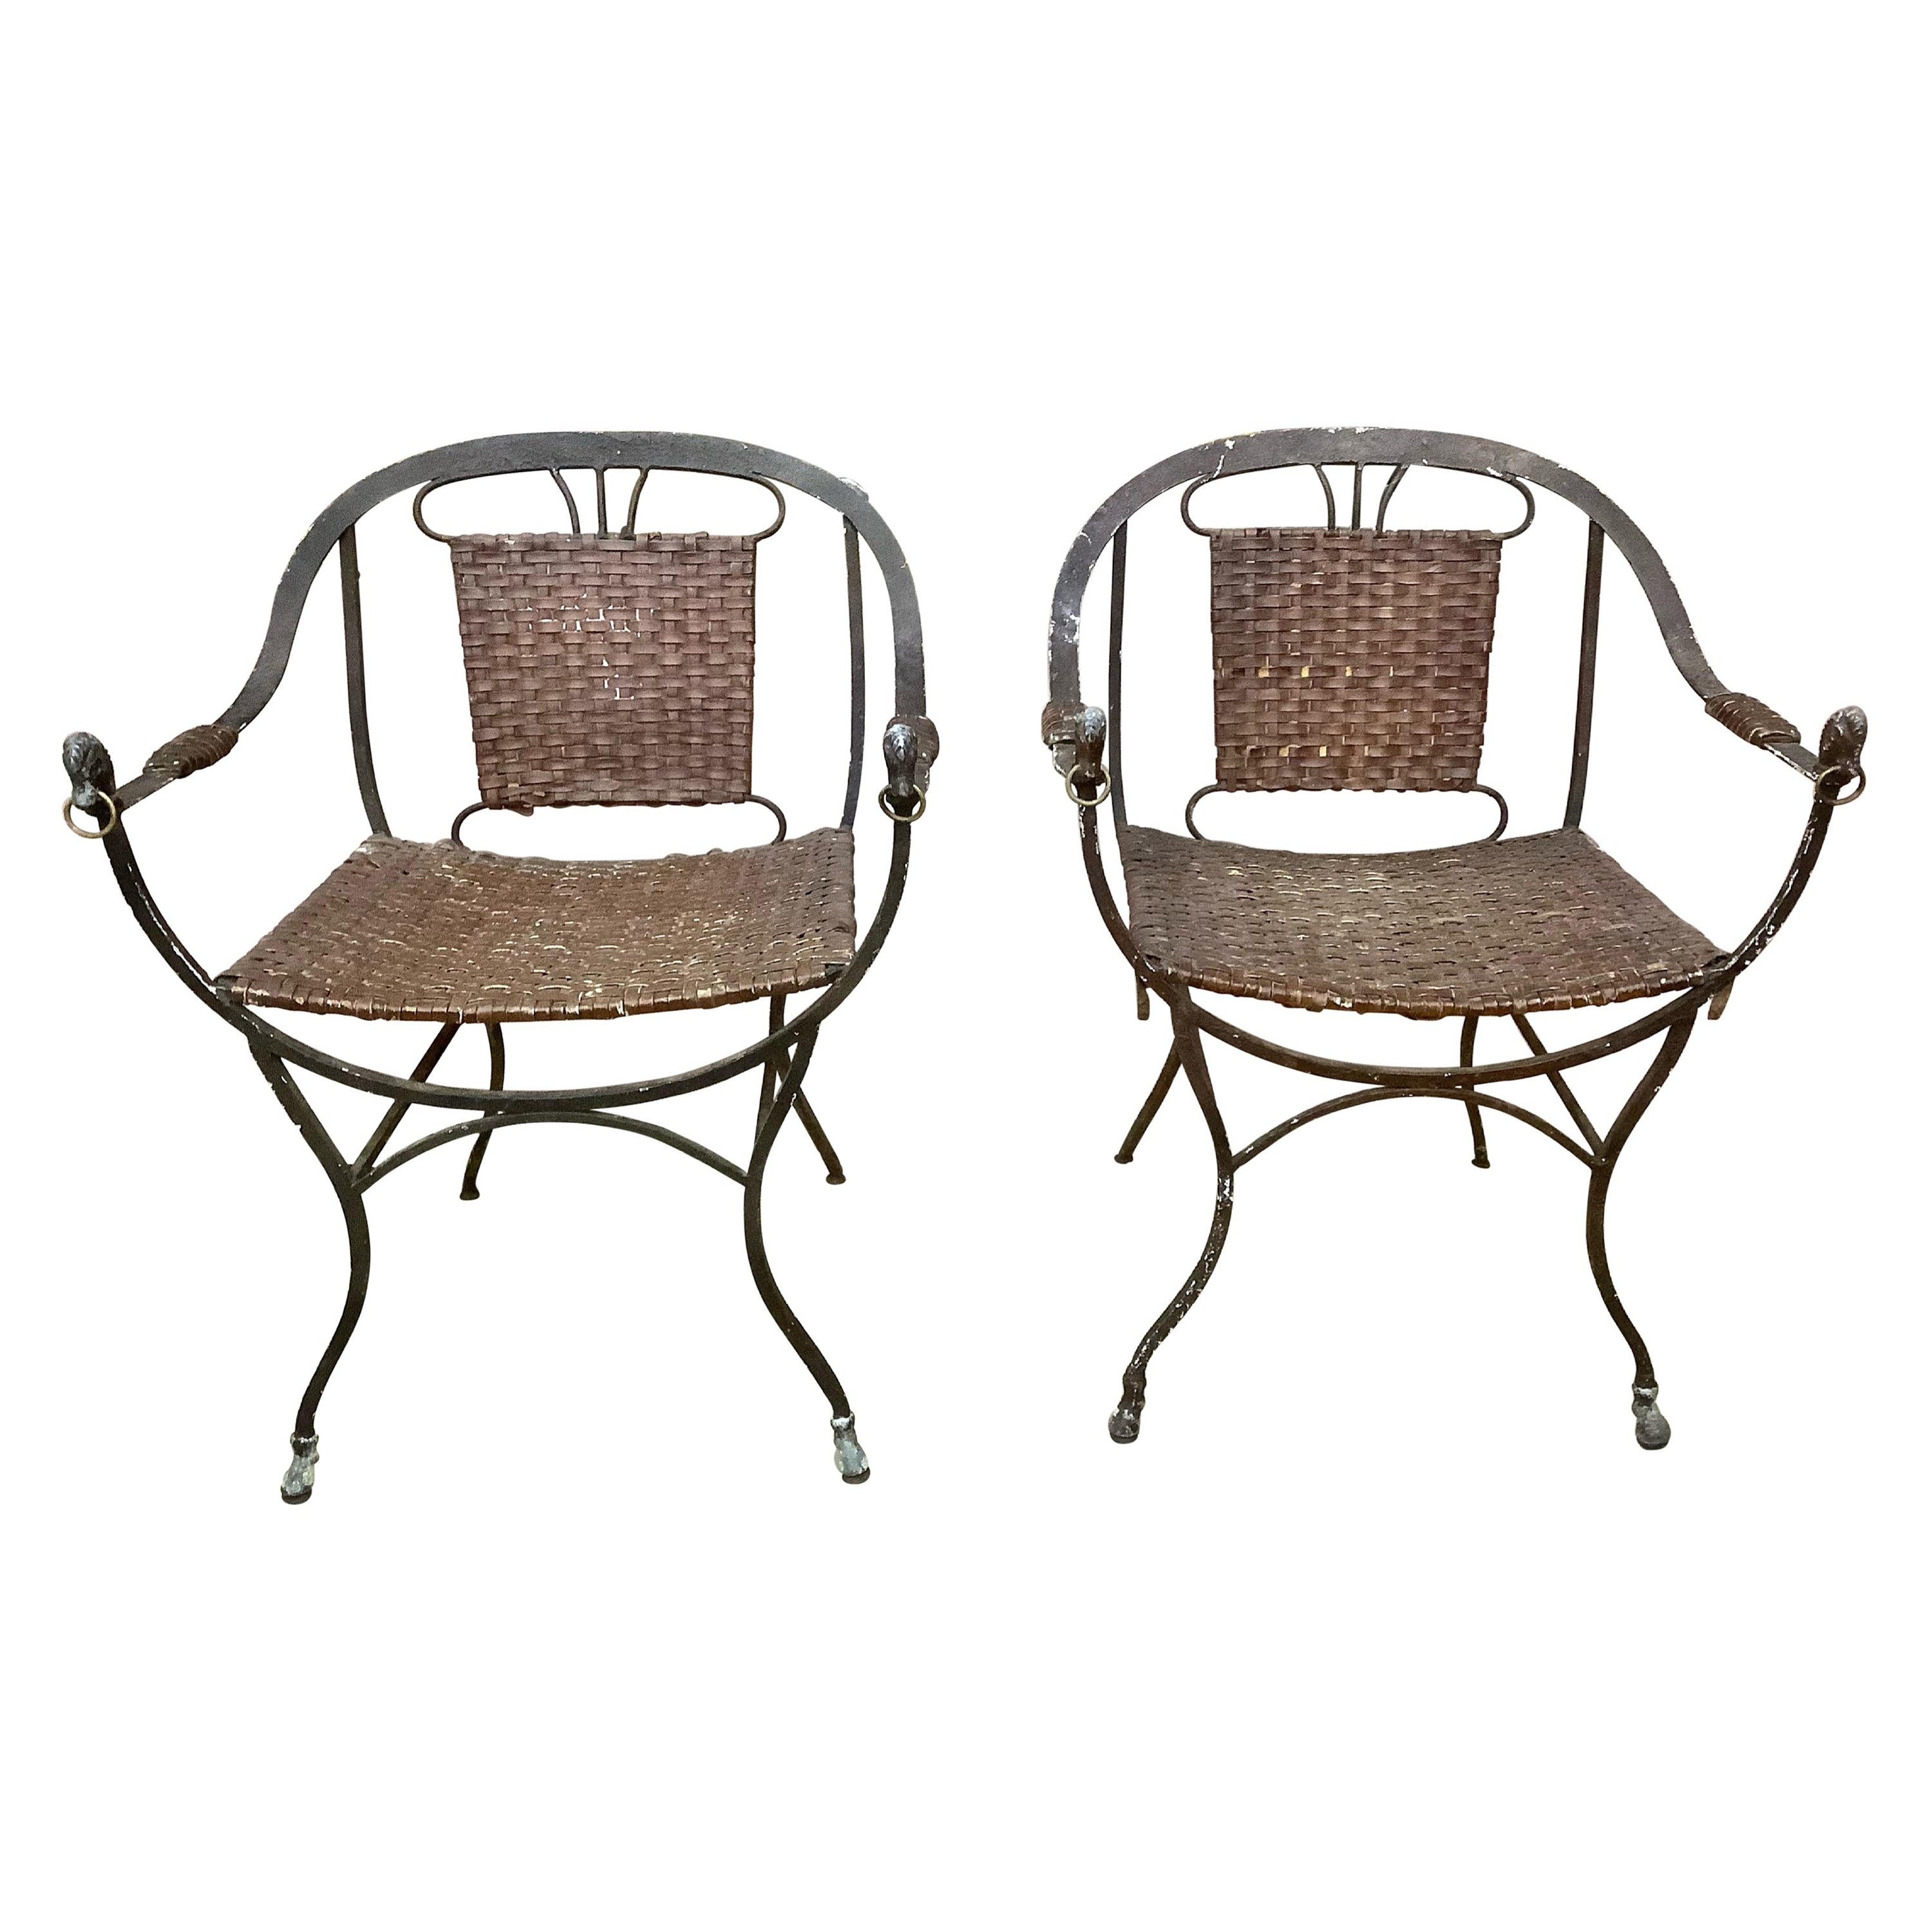 Pair of Iron Horseshoe Back and Leather Chairs For Sale